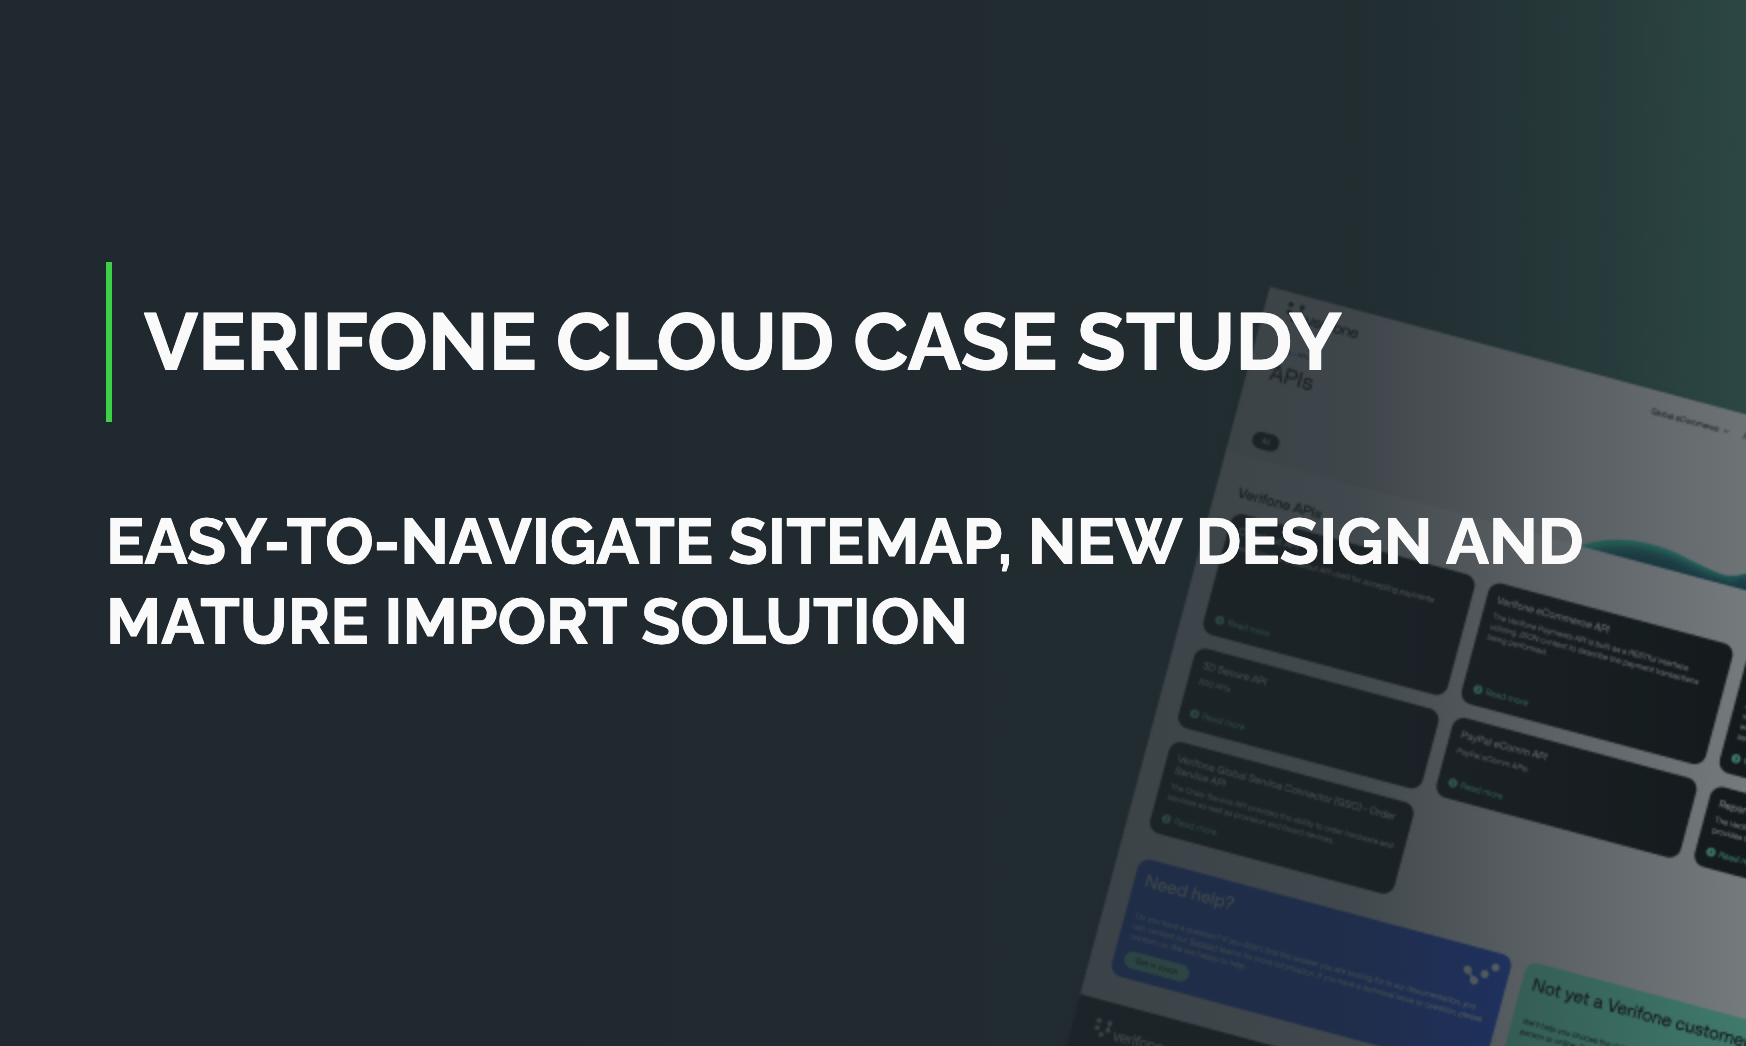 Title: Verifone Cloud Case Study Easy-to-Navigate Sitemap, New Design and Mature Import Solution